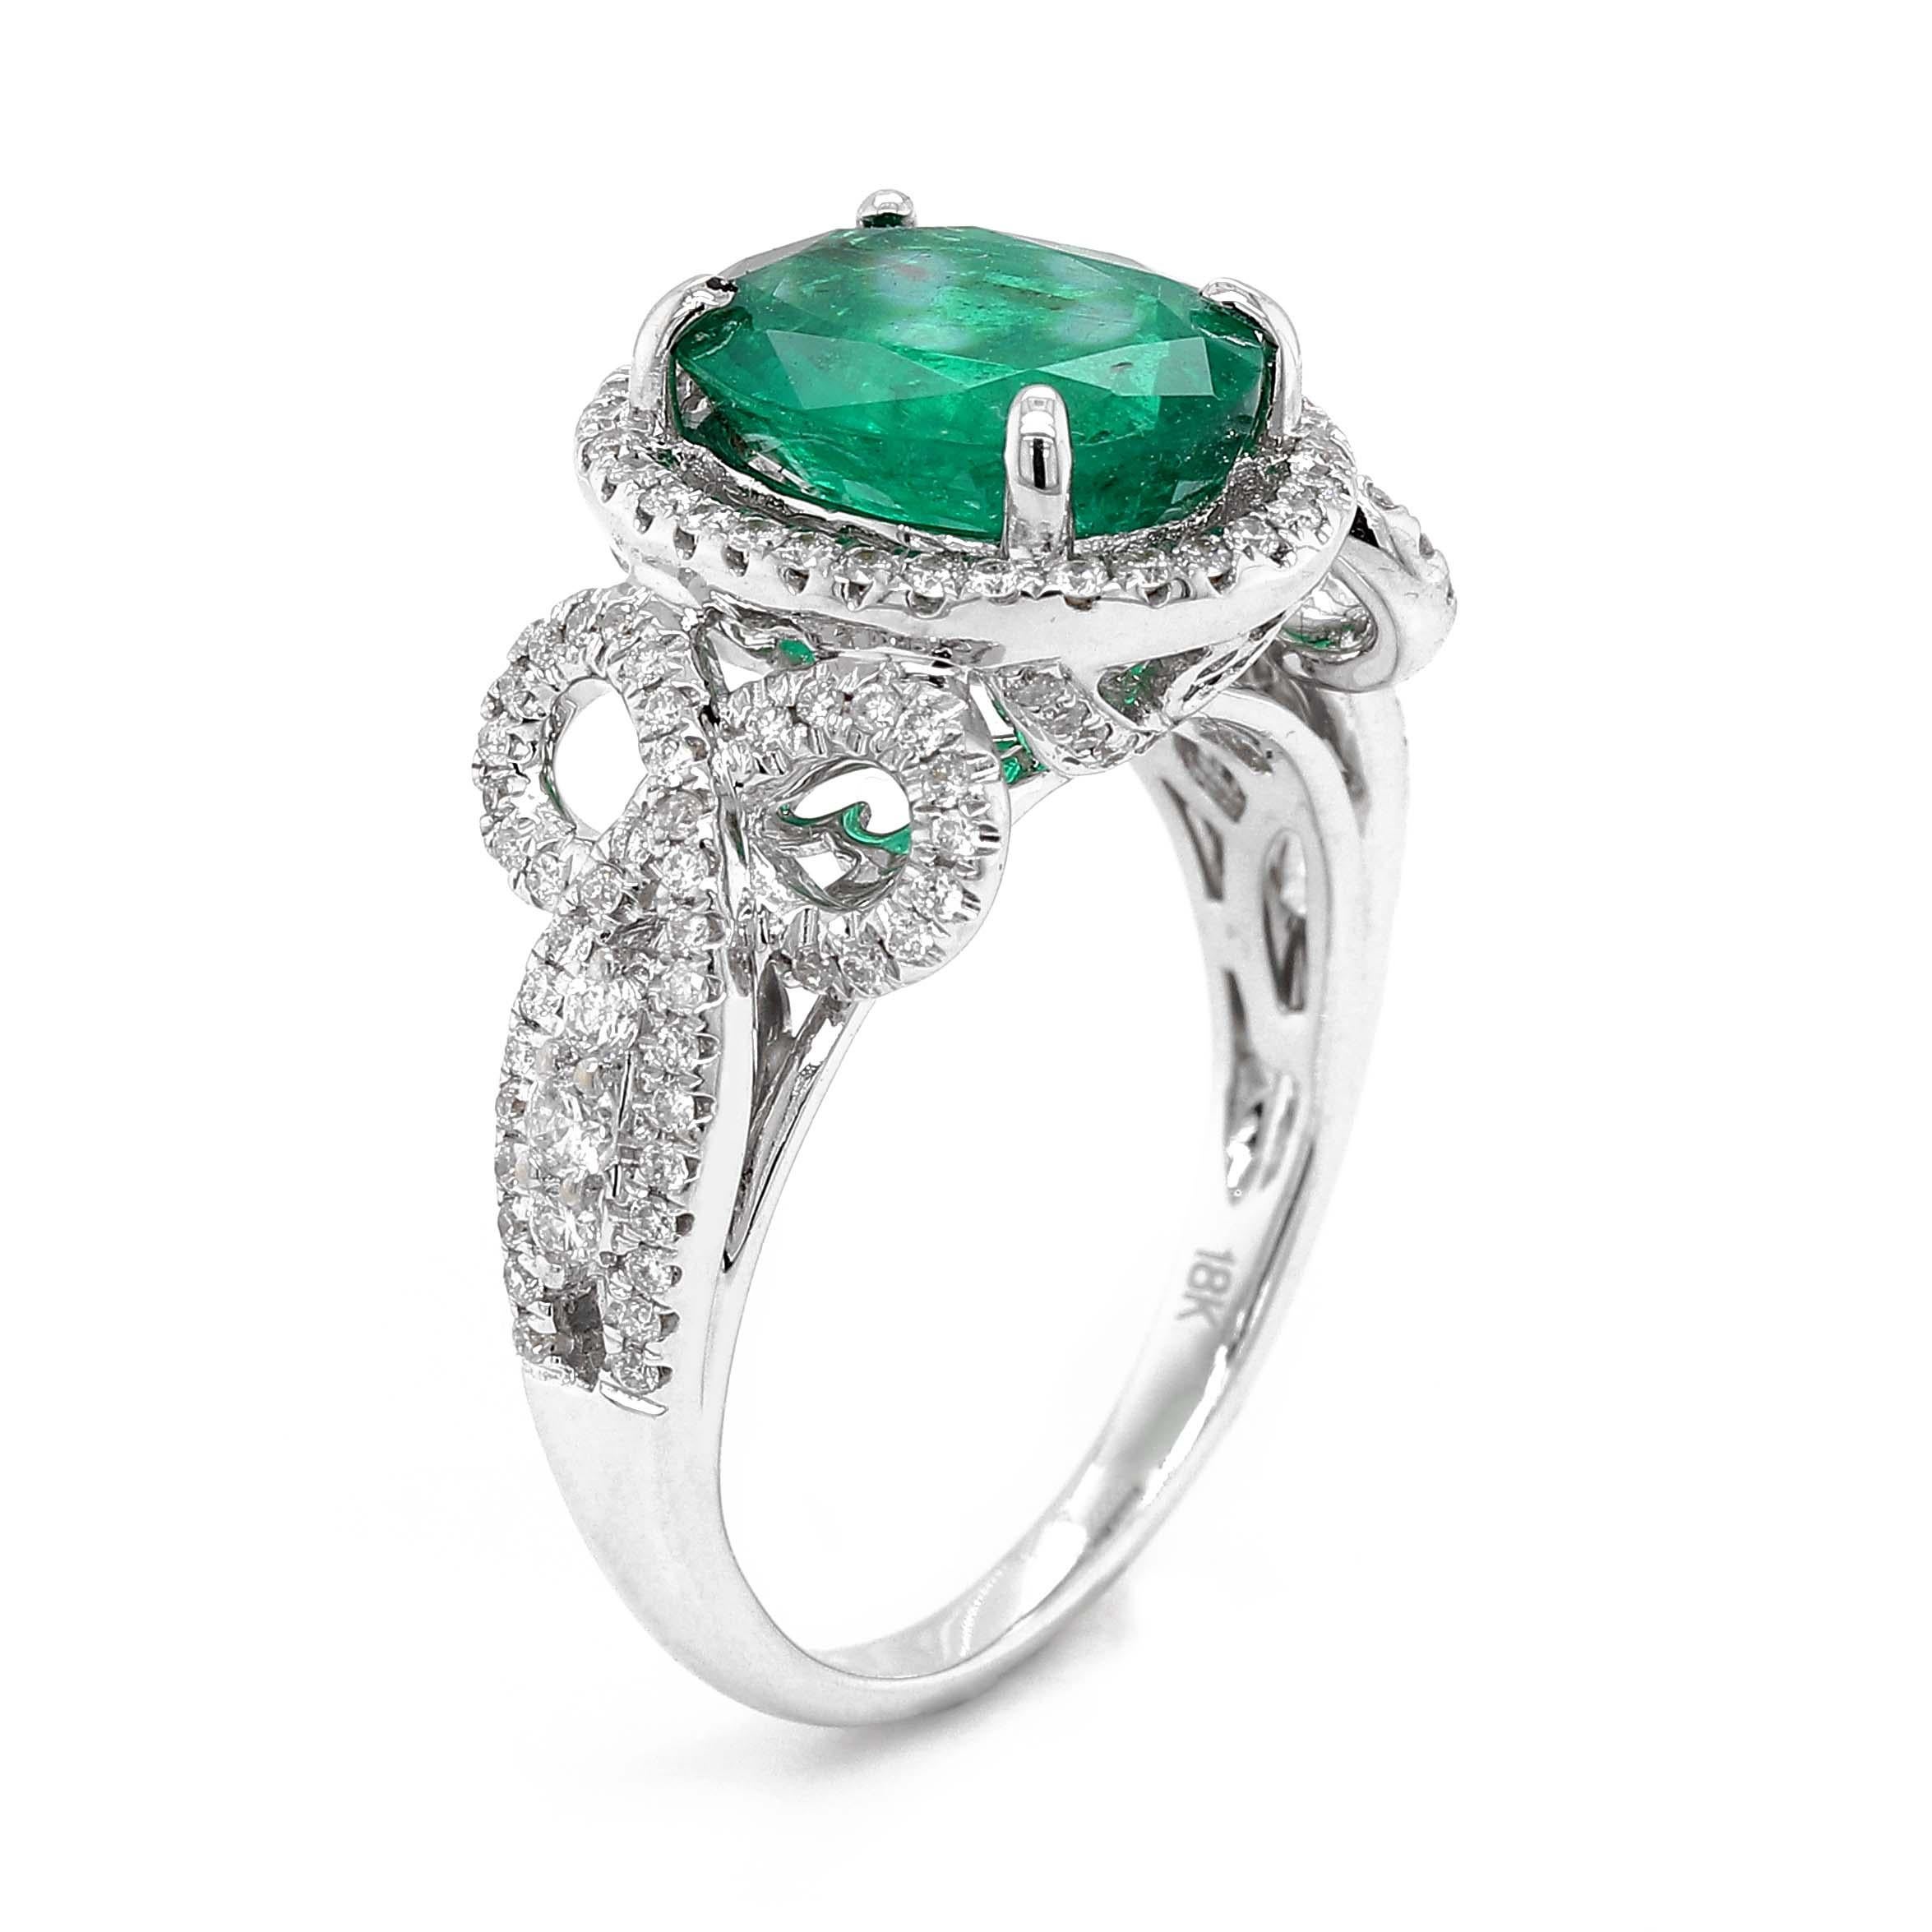 Ring containing one fine oval shape Emerald of about 2.42 carats measuring 10.22x7.85x4.67mm. The emerald is surrounded by 140 round brilliant cut Diamonds of about 0.51 carats with a clarity of SI and color G. All stones are set in an 18k white